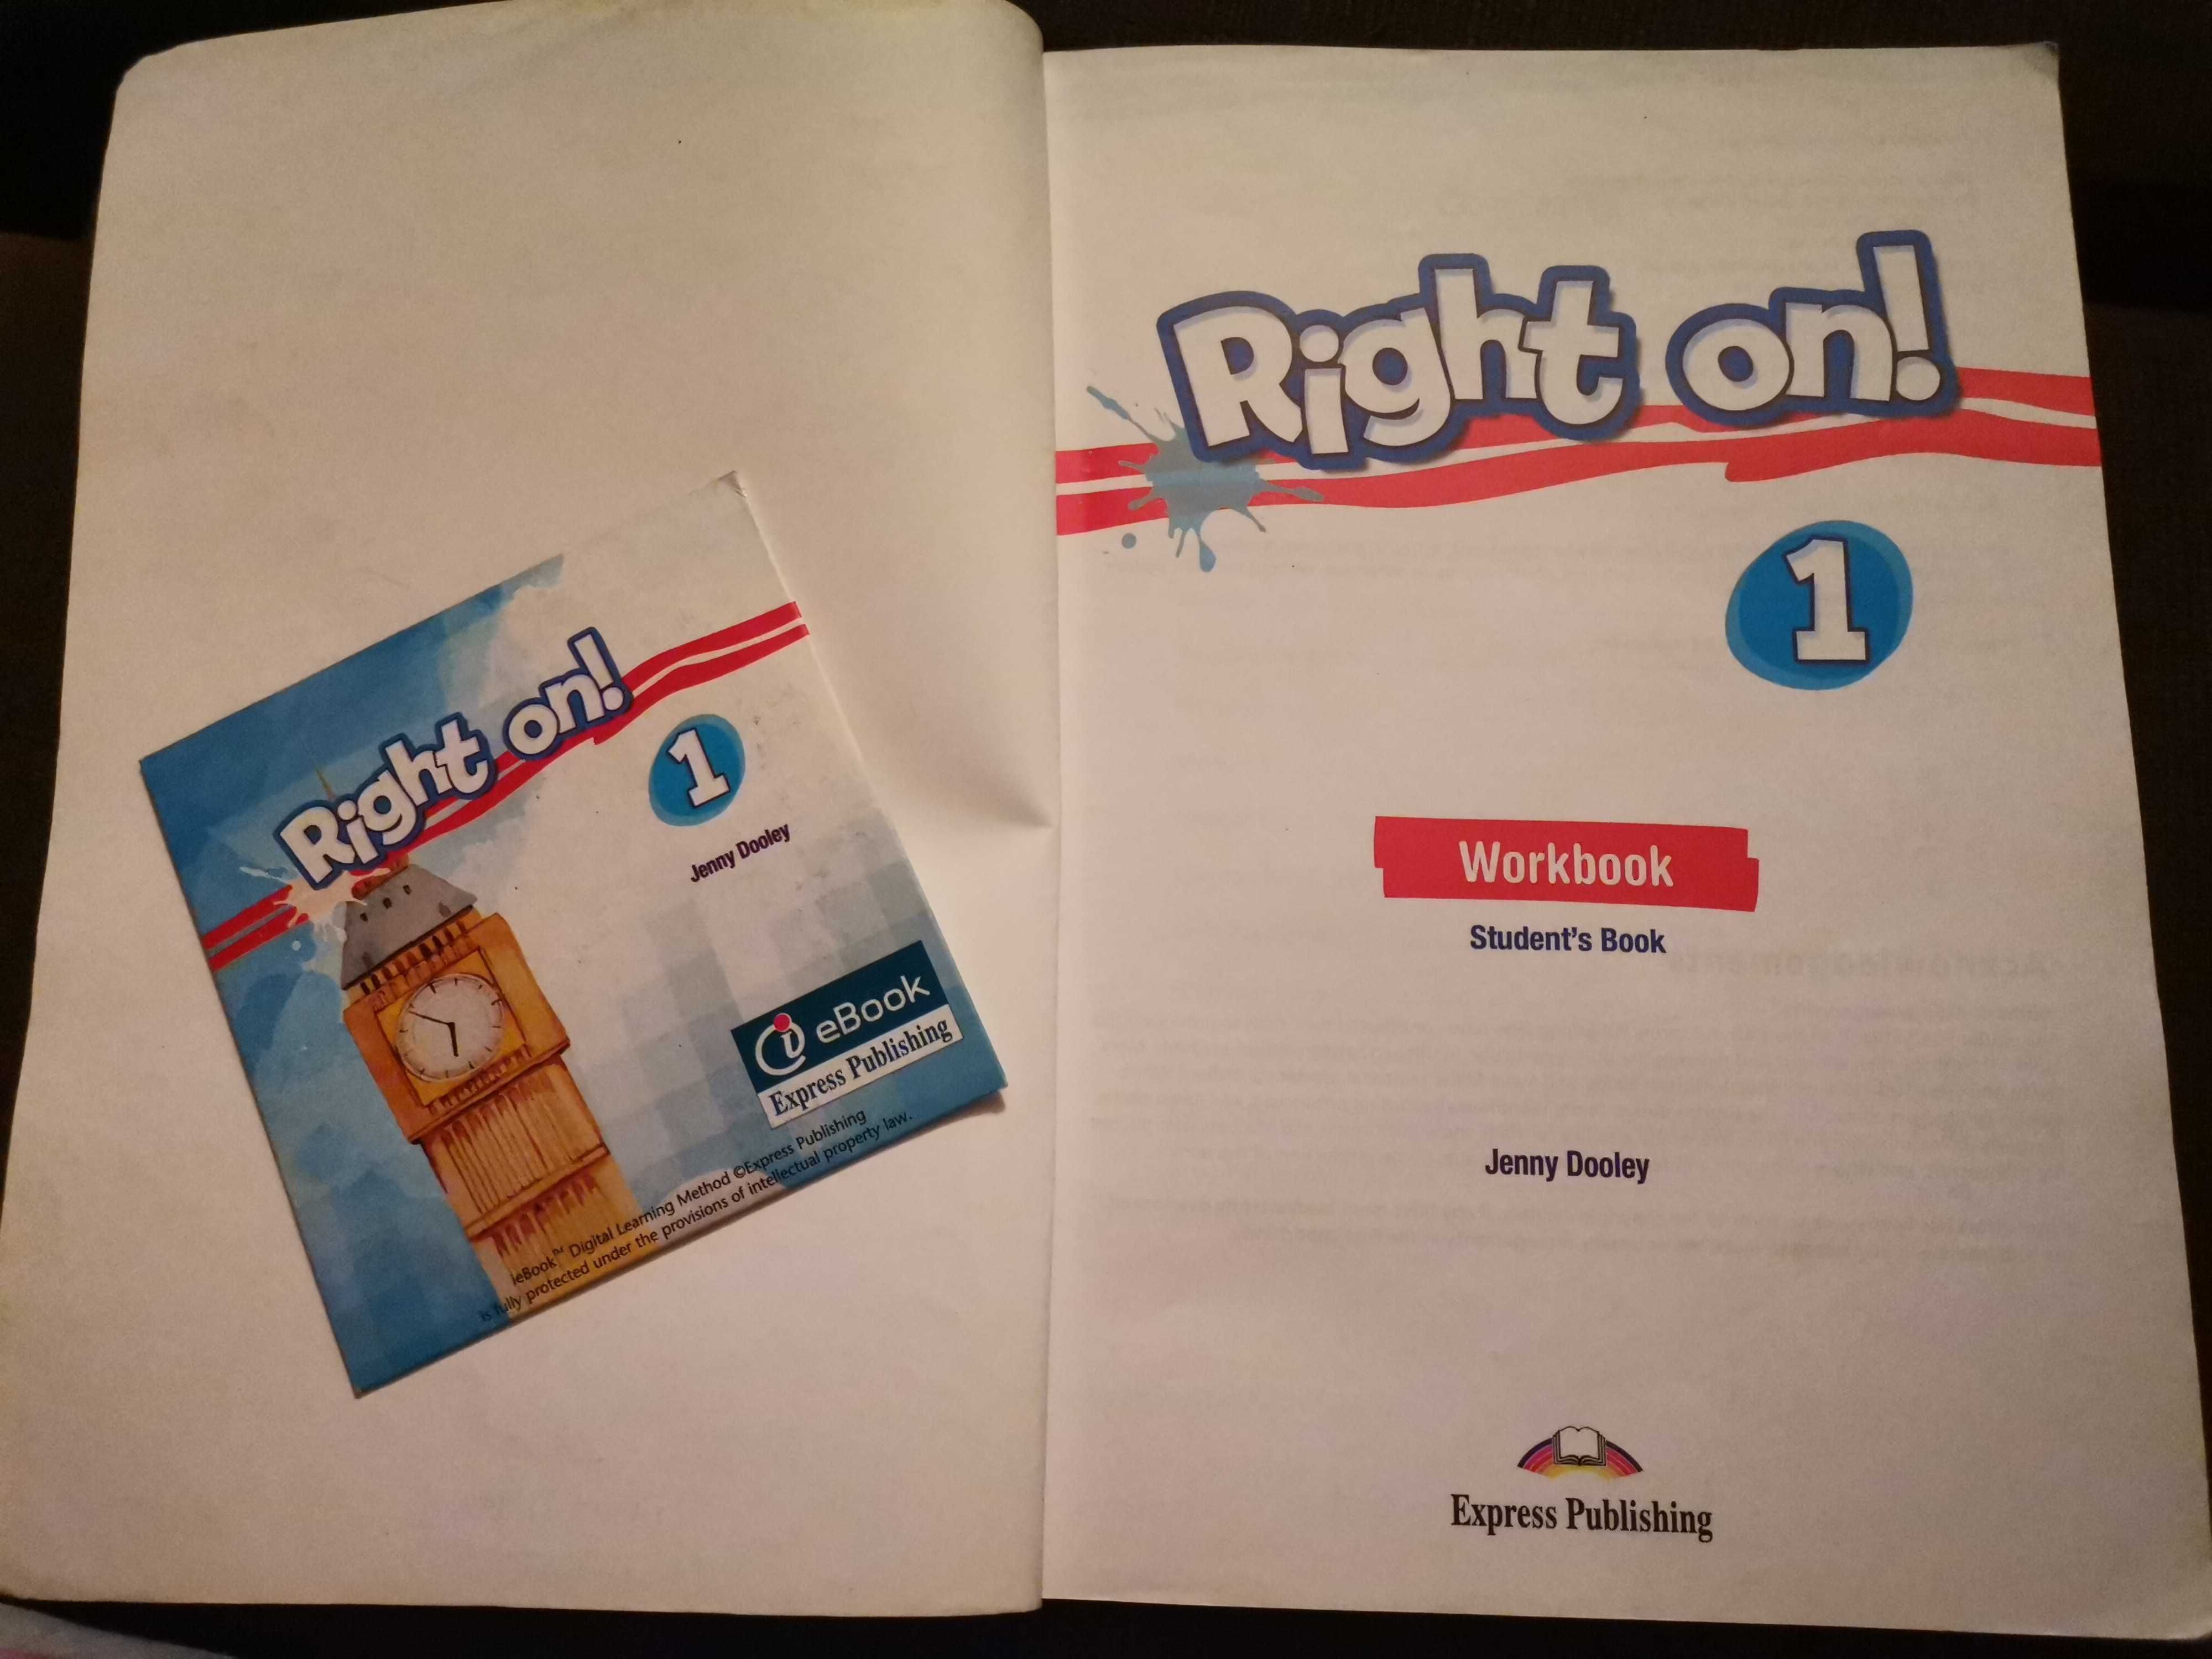 "Right on! " 1 Student's Book + workbook